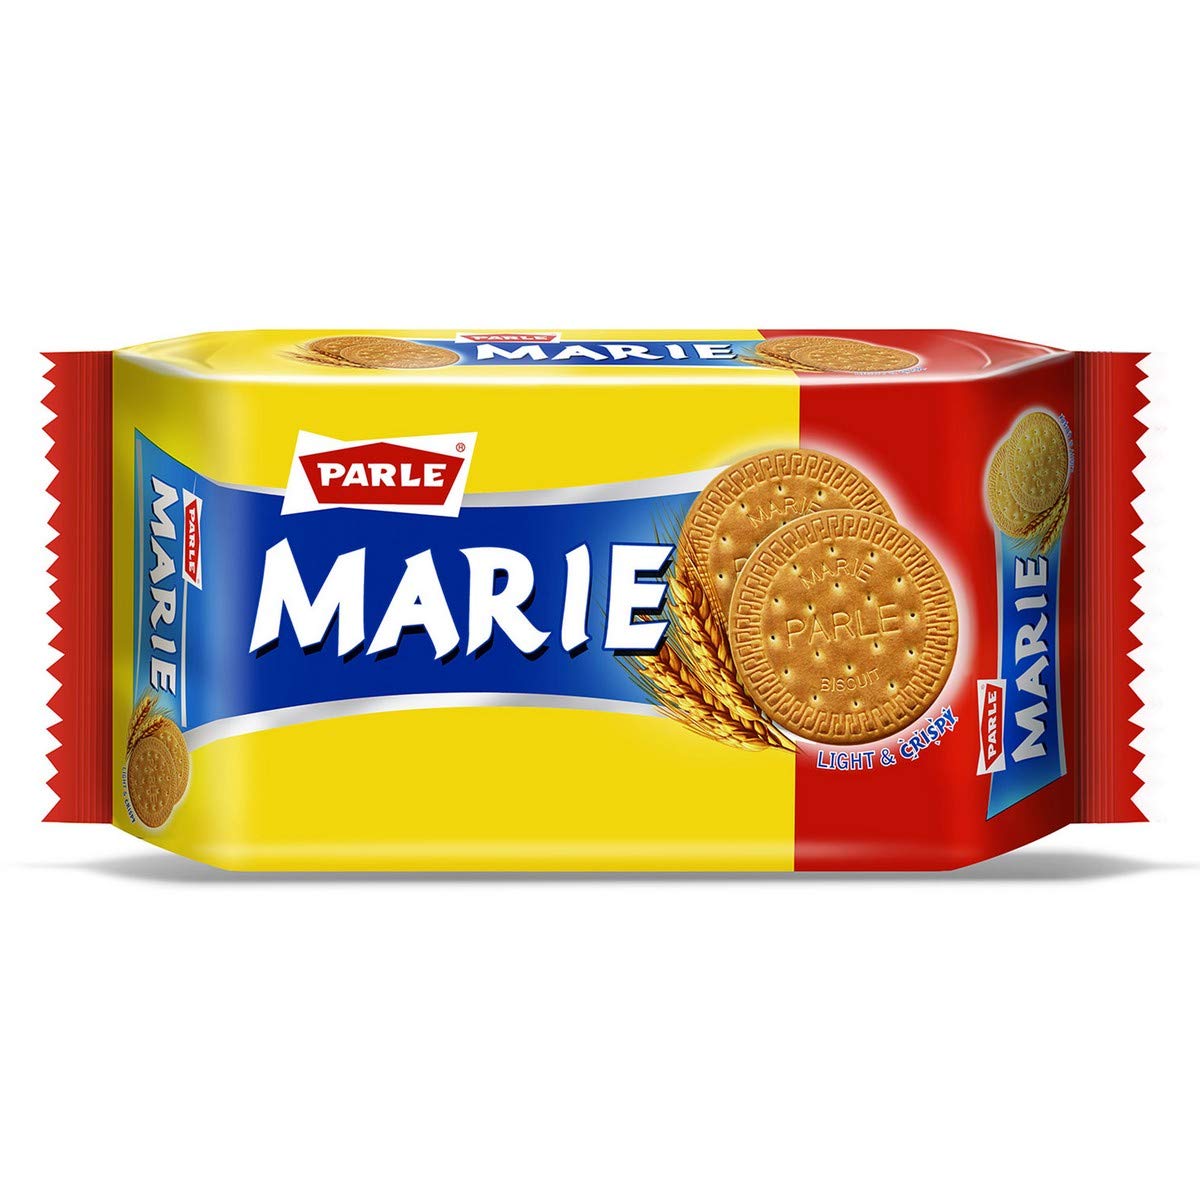 Parle Marie Biscuit , 250g / 300g (Weight May Vary)